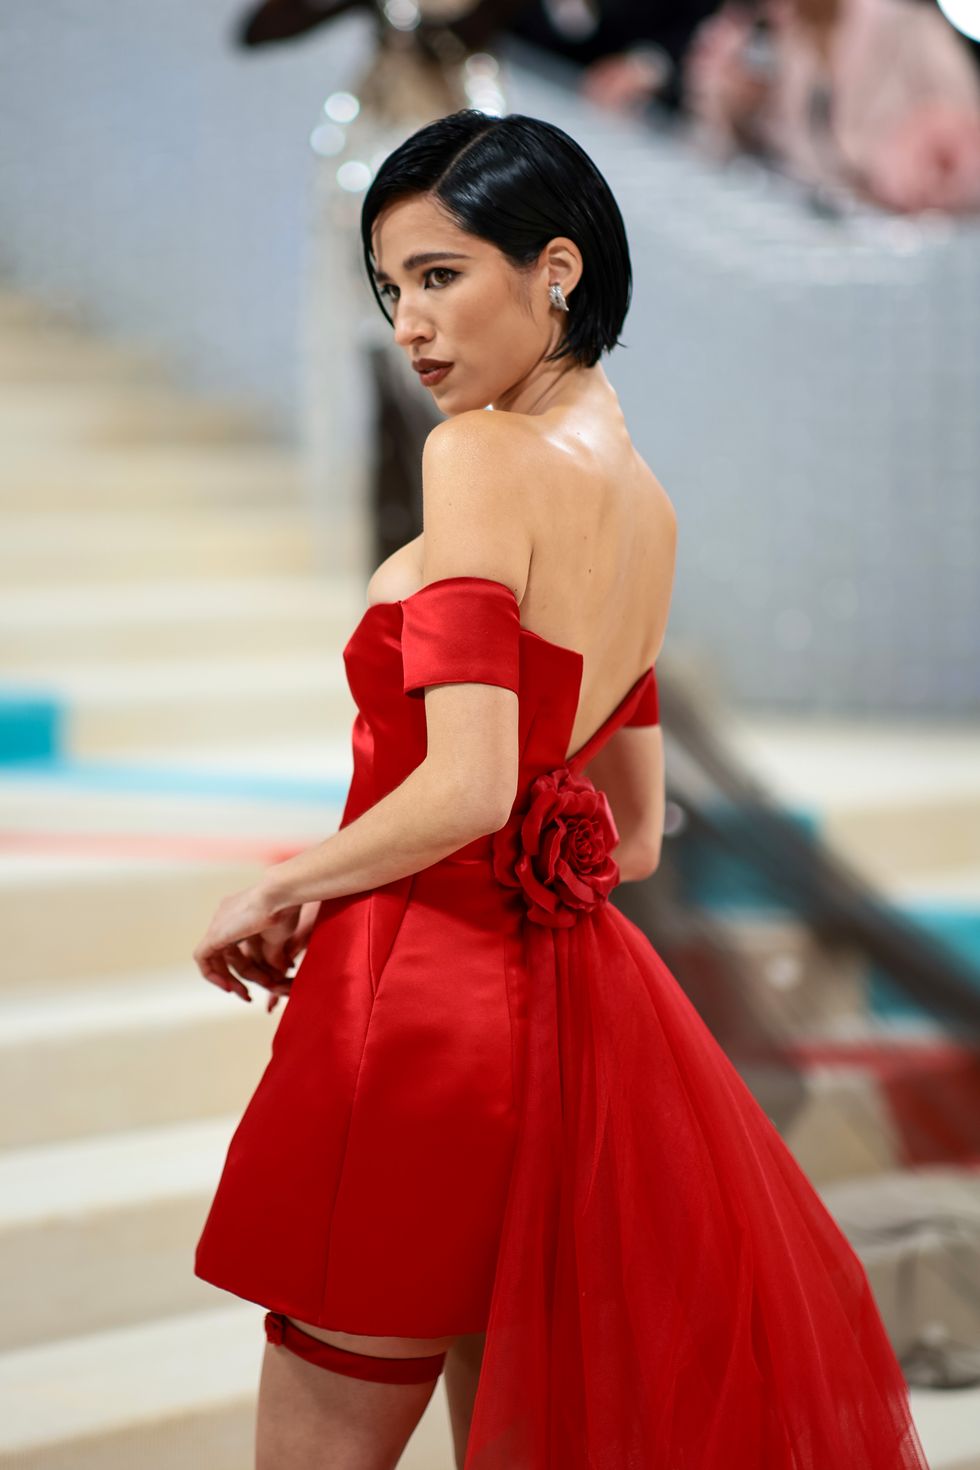 Yellowstone Star Kelsey Asbille Makes Her Met Gala Debut See Photos